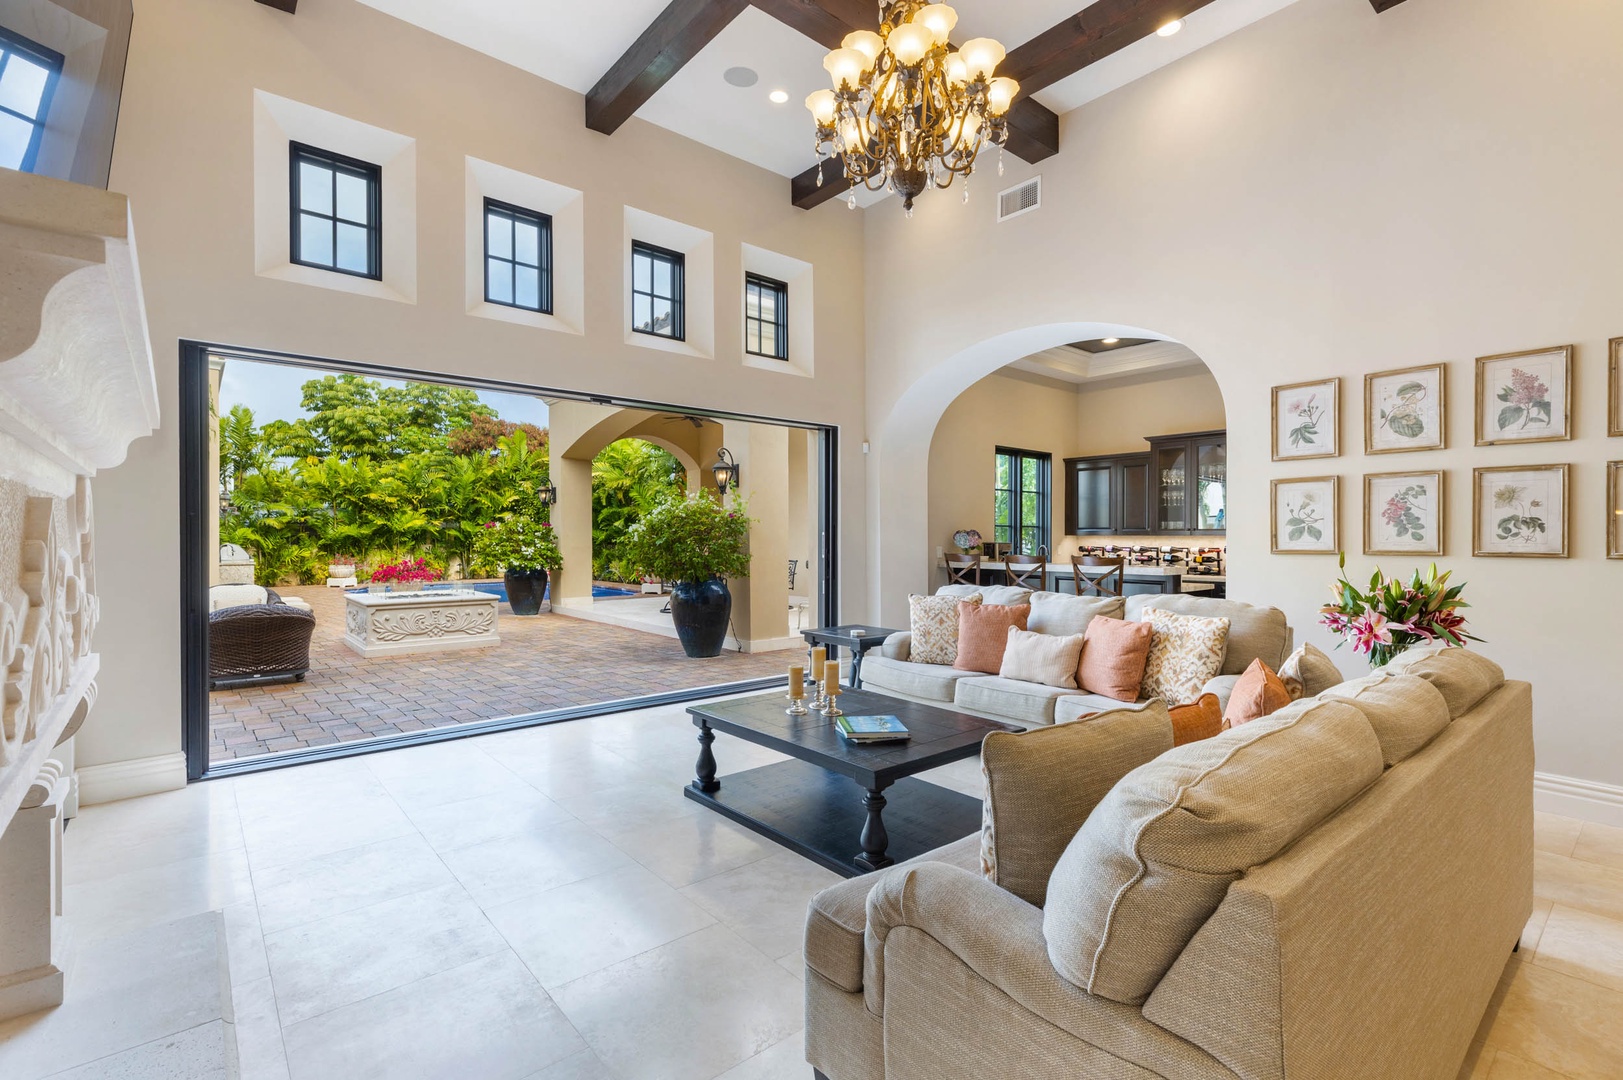 Honolulu Vacation Rentals, Royal Kahala Estate - Elegant living space with high ceilings, plush seating, and natural light, brings the outside indoor.